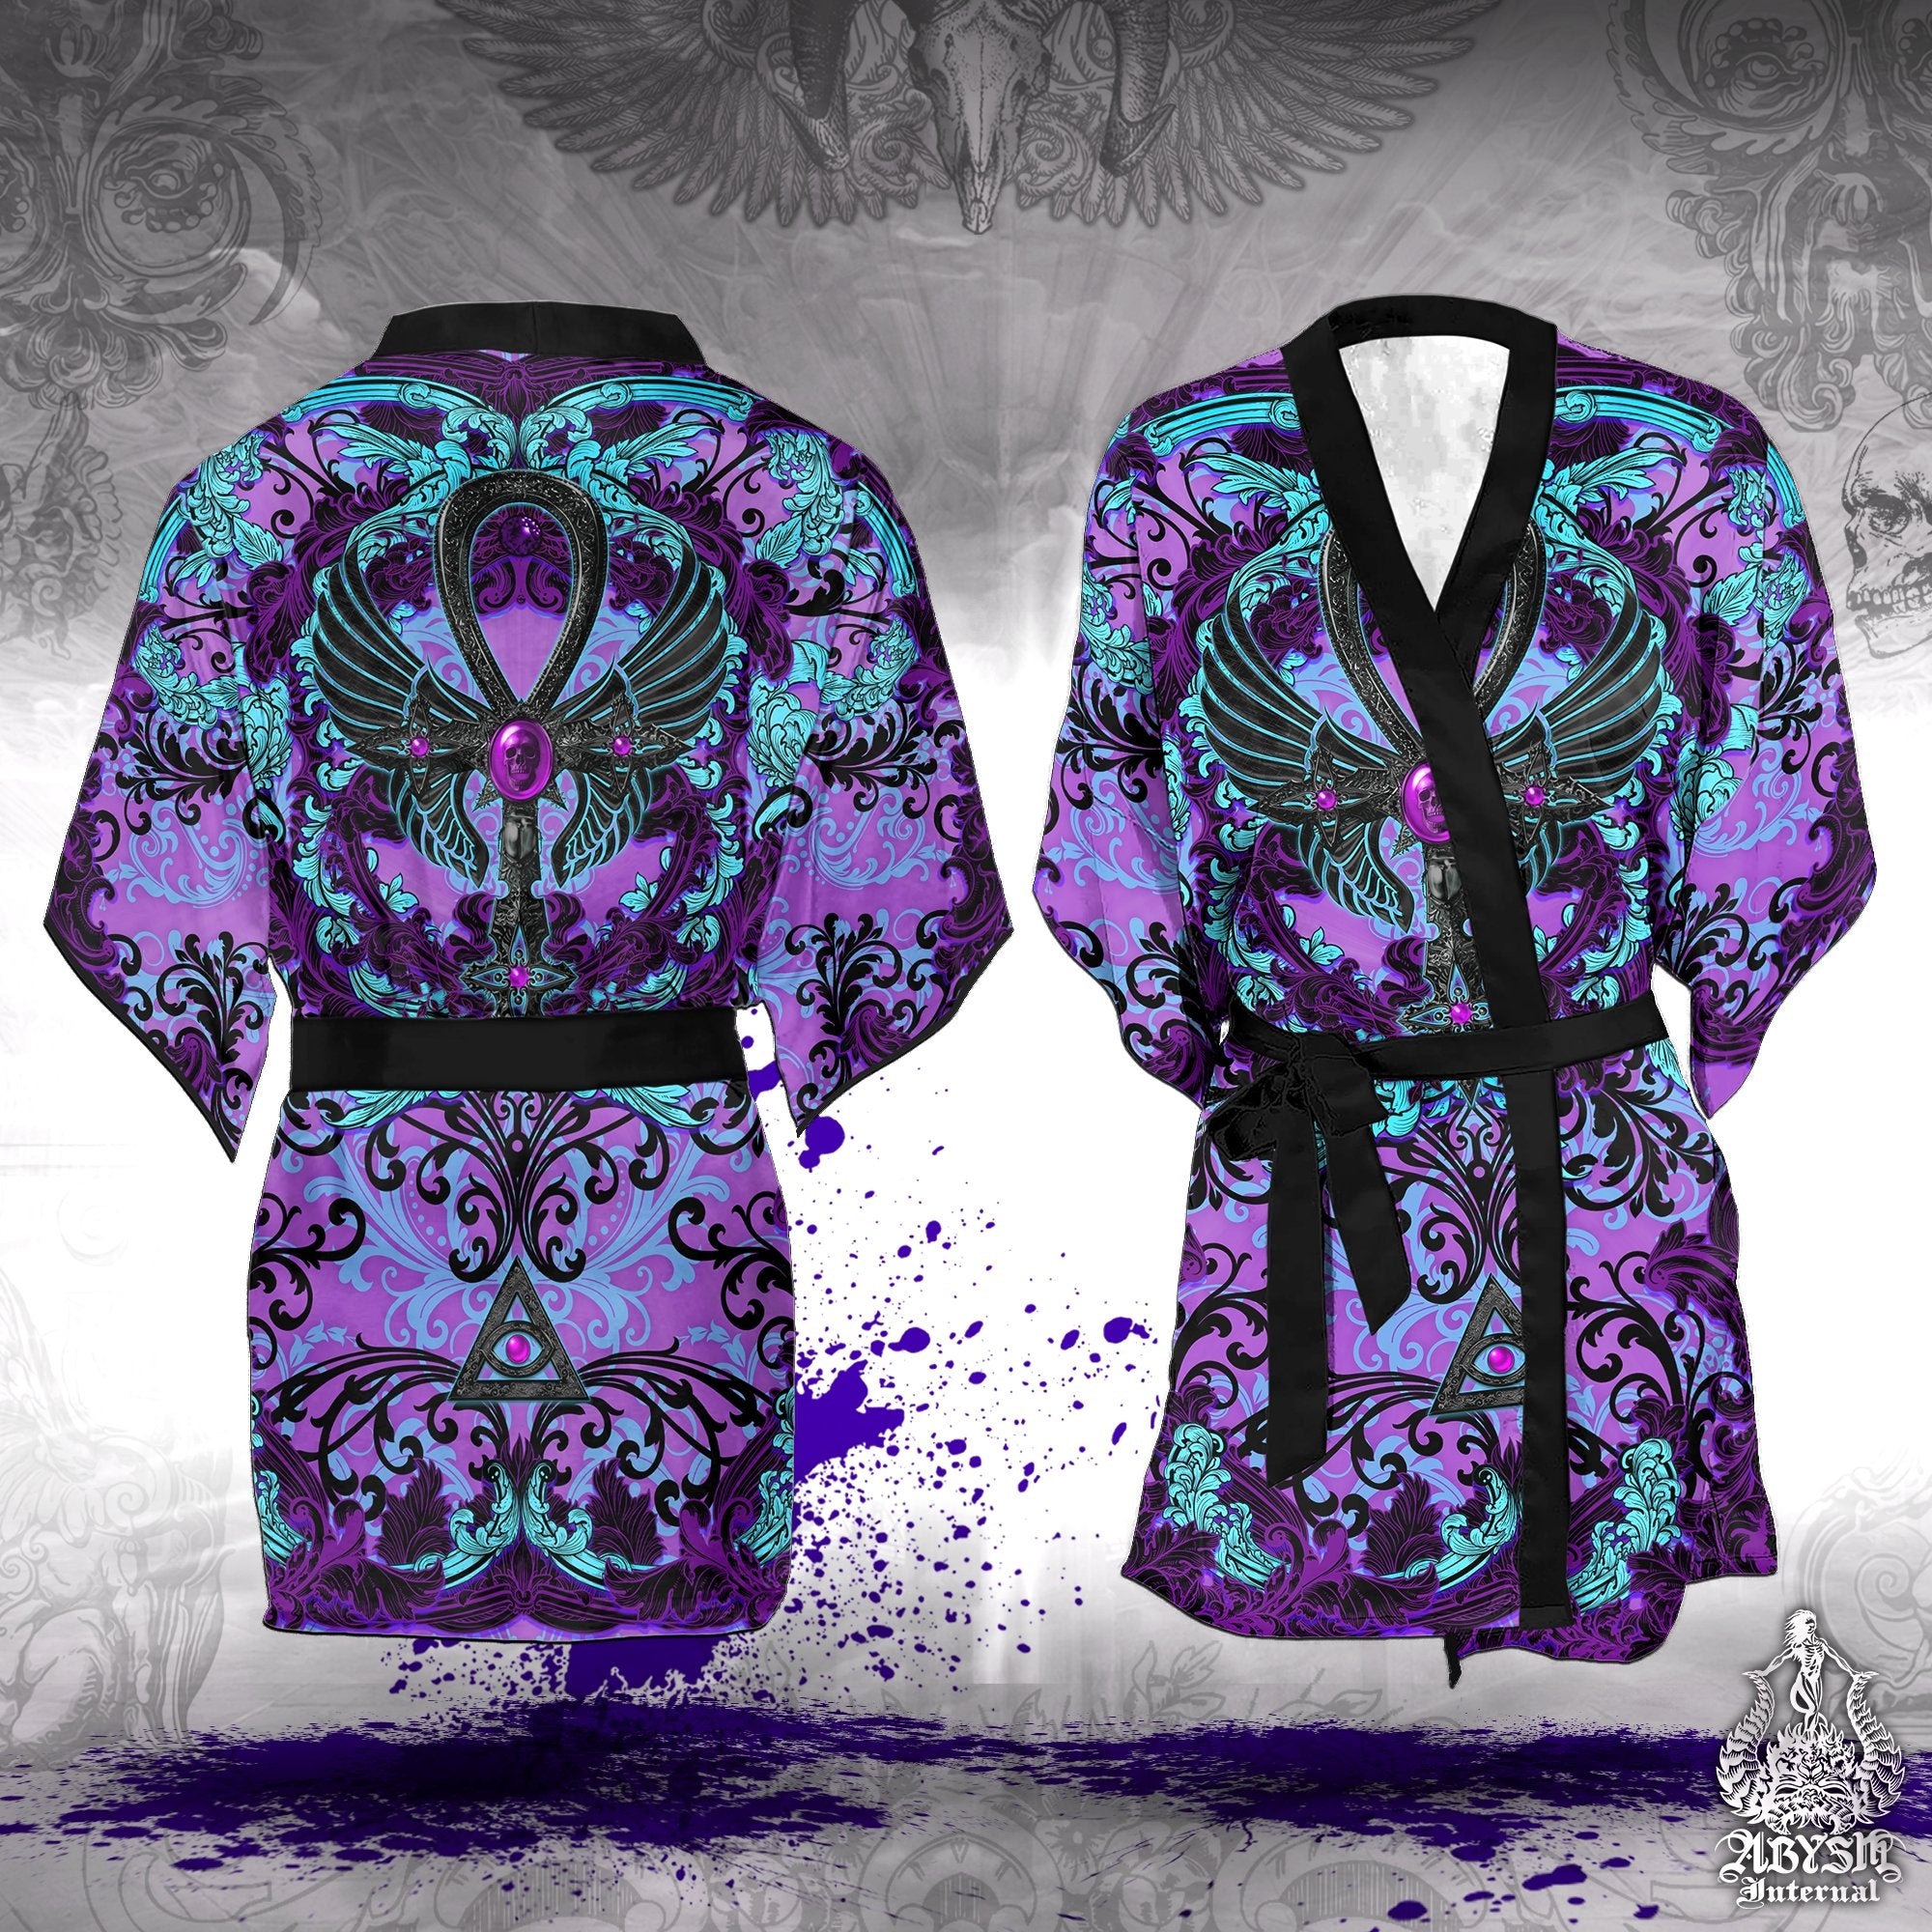 Pastel Goth Cover Up, Beach Outfit, Party Kimono, Gothic Summer Festival Robe, Indie and Alternative Clothing, Unisex - Ankh, Black Purple - Abysm Internal